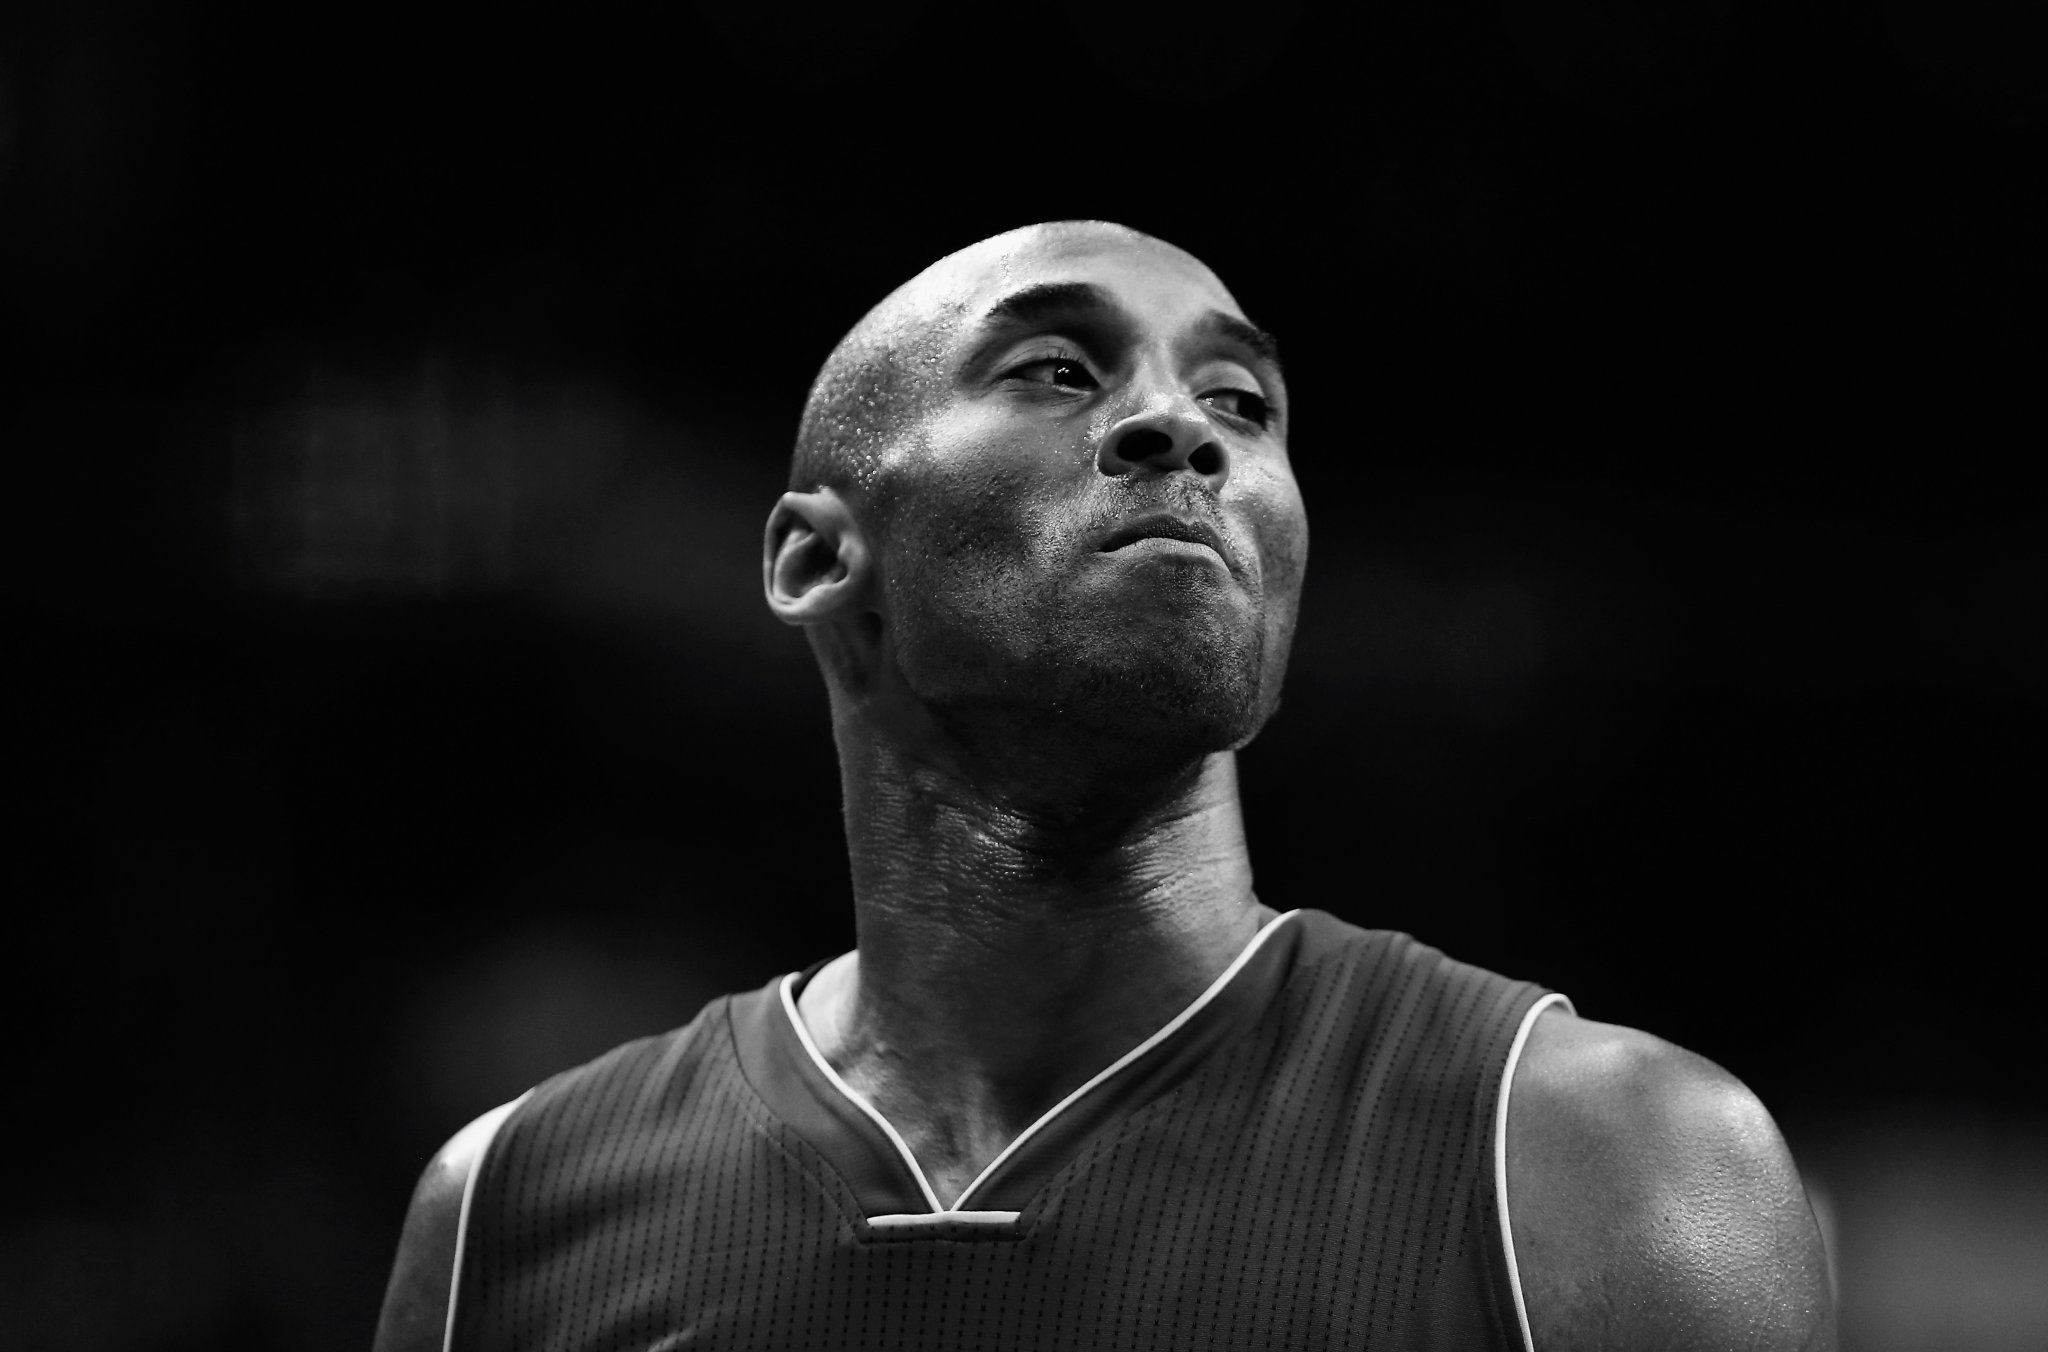 USA Today Apologizes For Insensitive Kobe Bryant Helicopter Crash Tweets on Death Anniversary